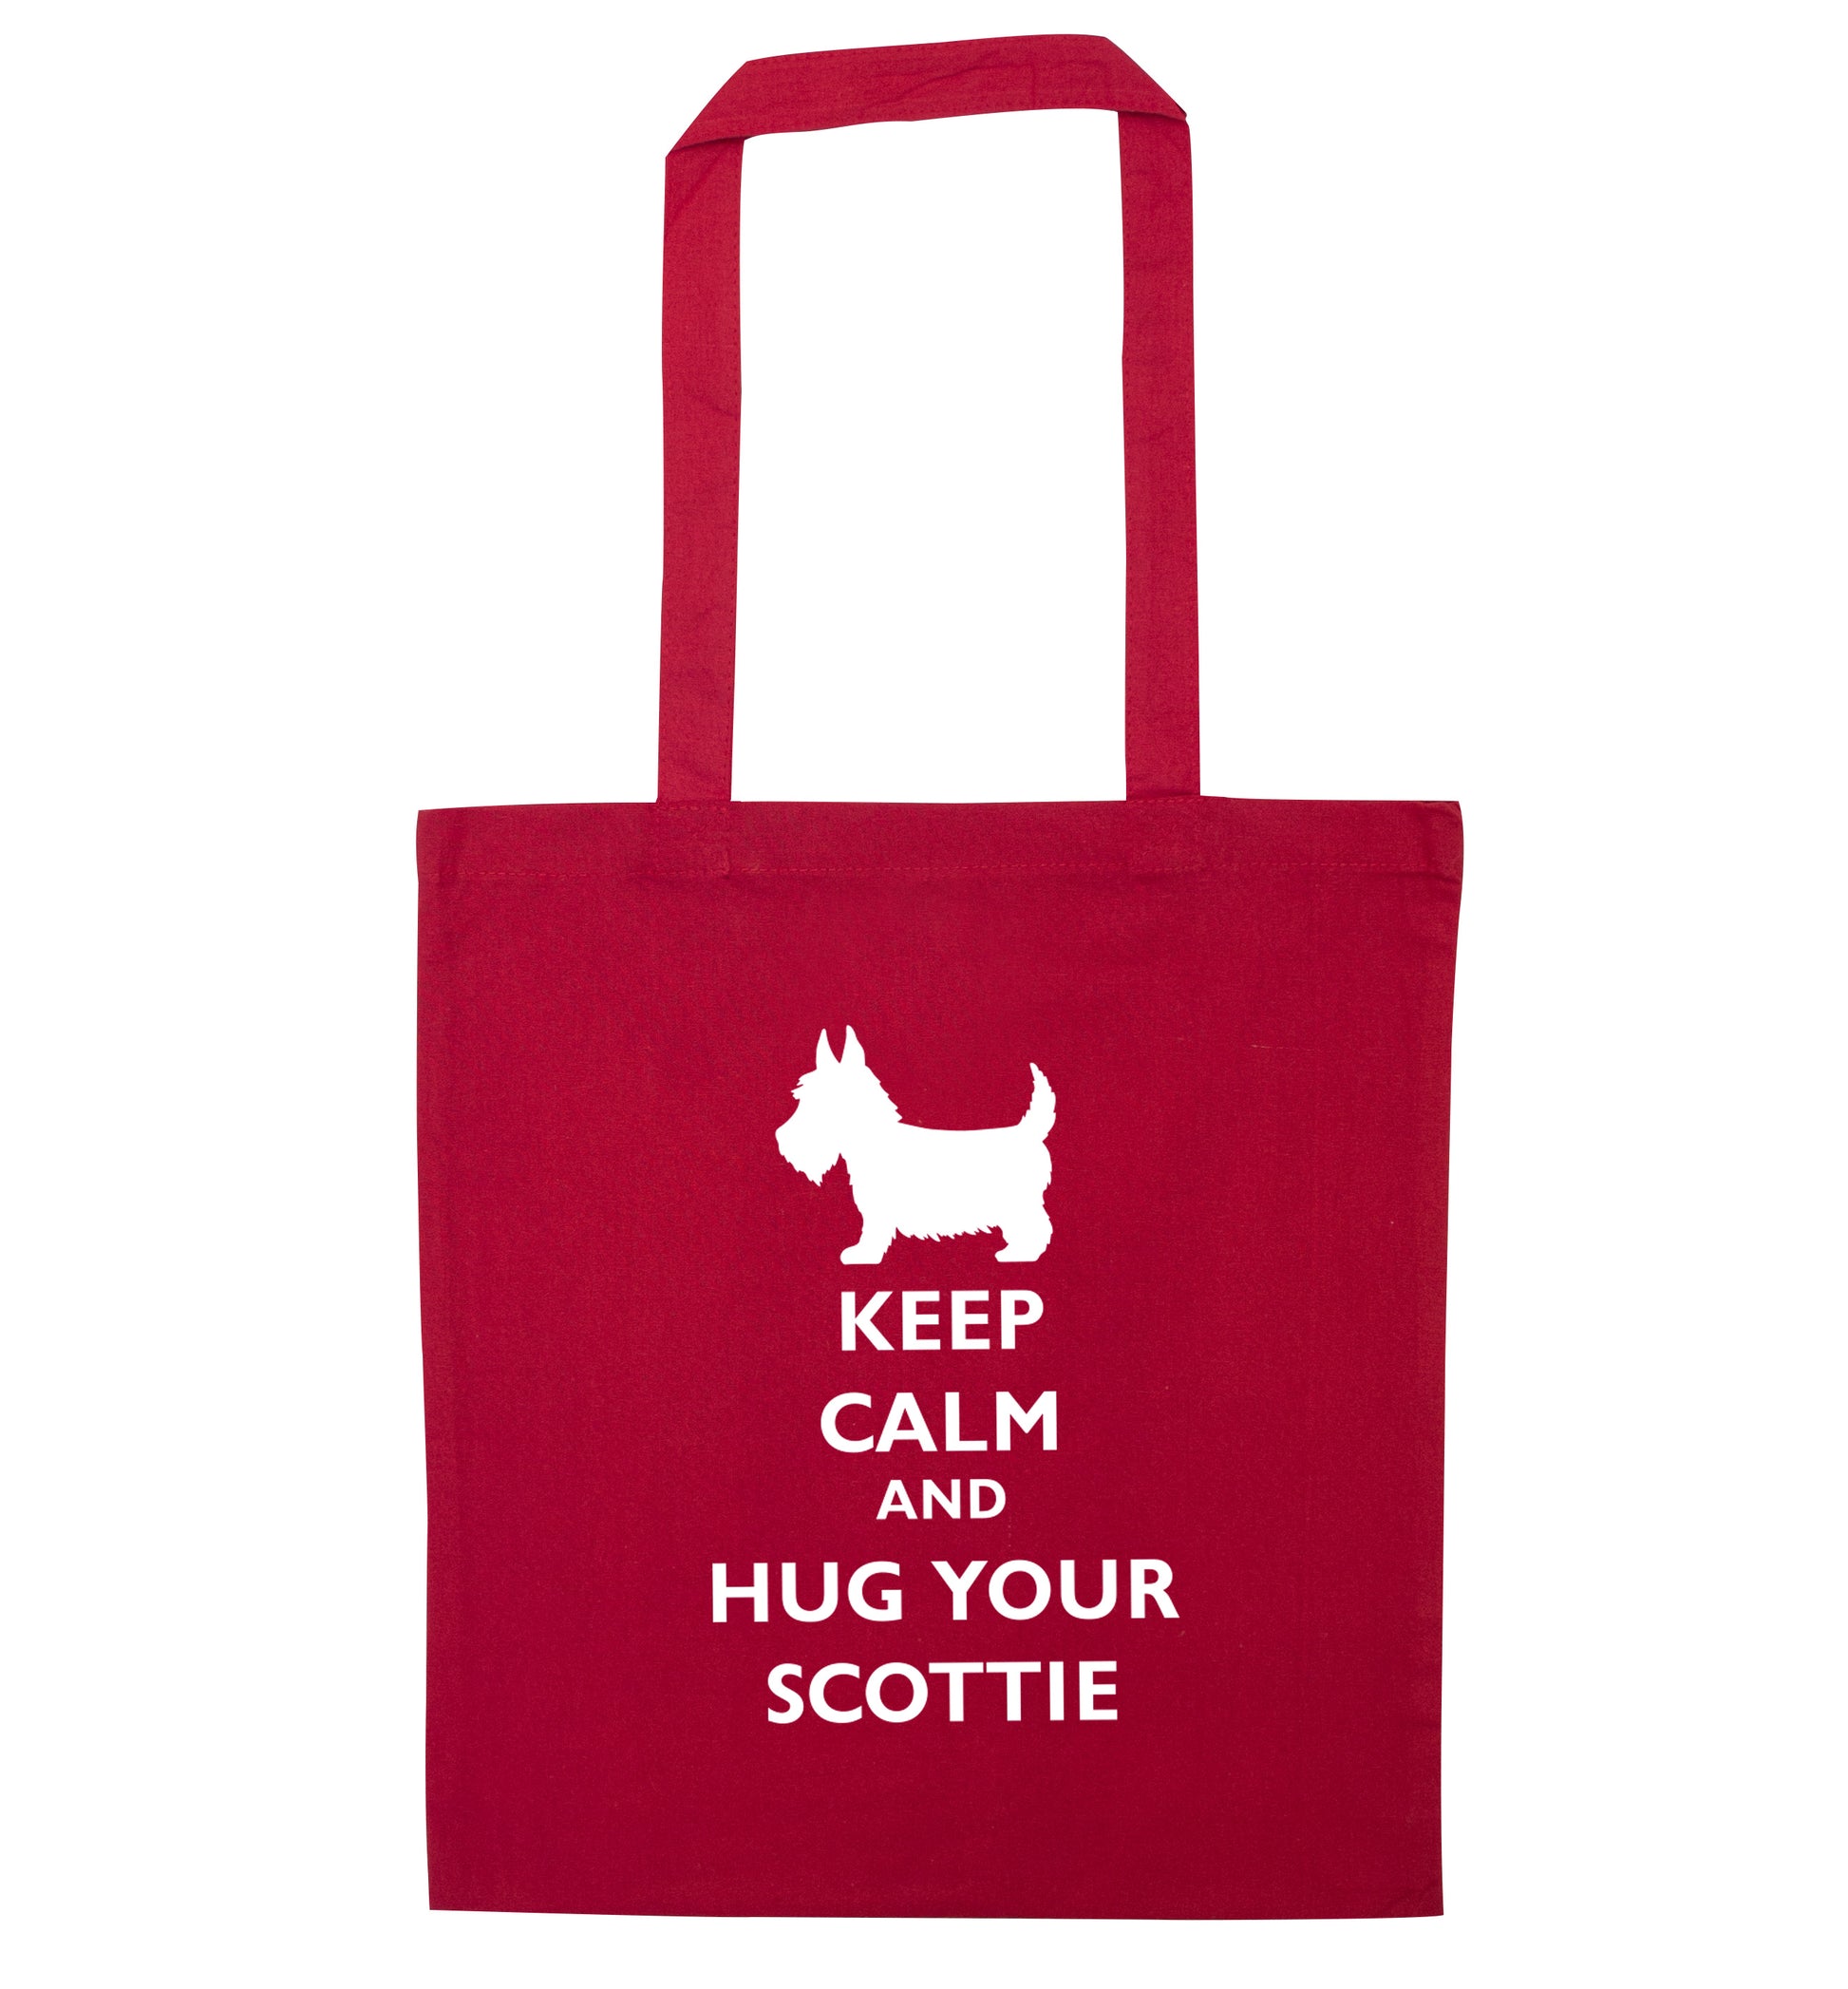 Keep calm and hug your scottie red tote bag